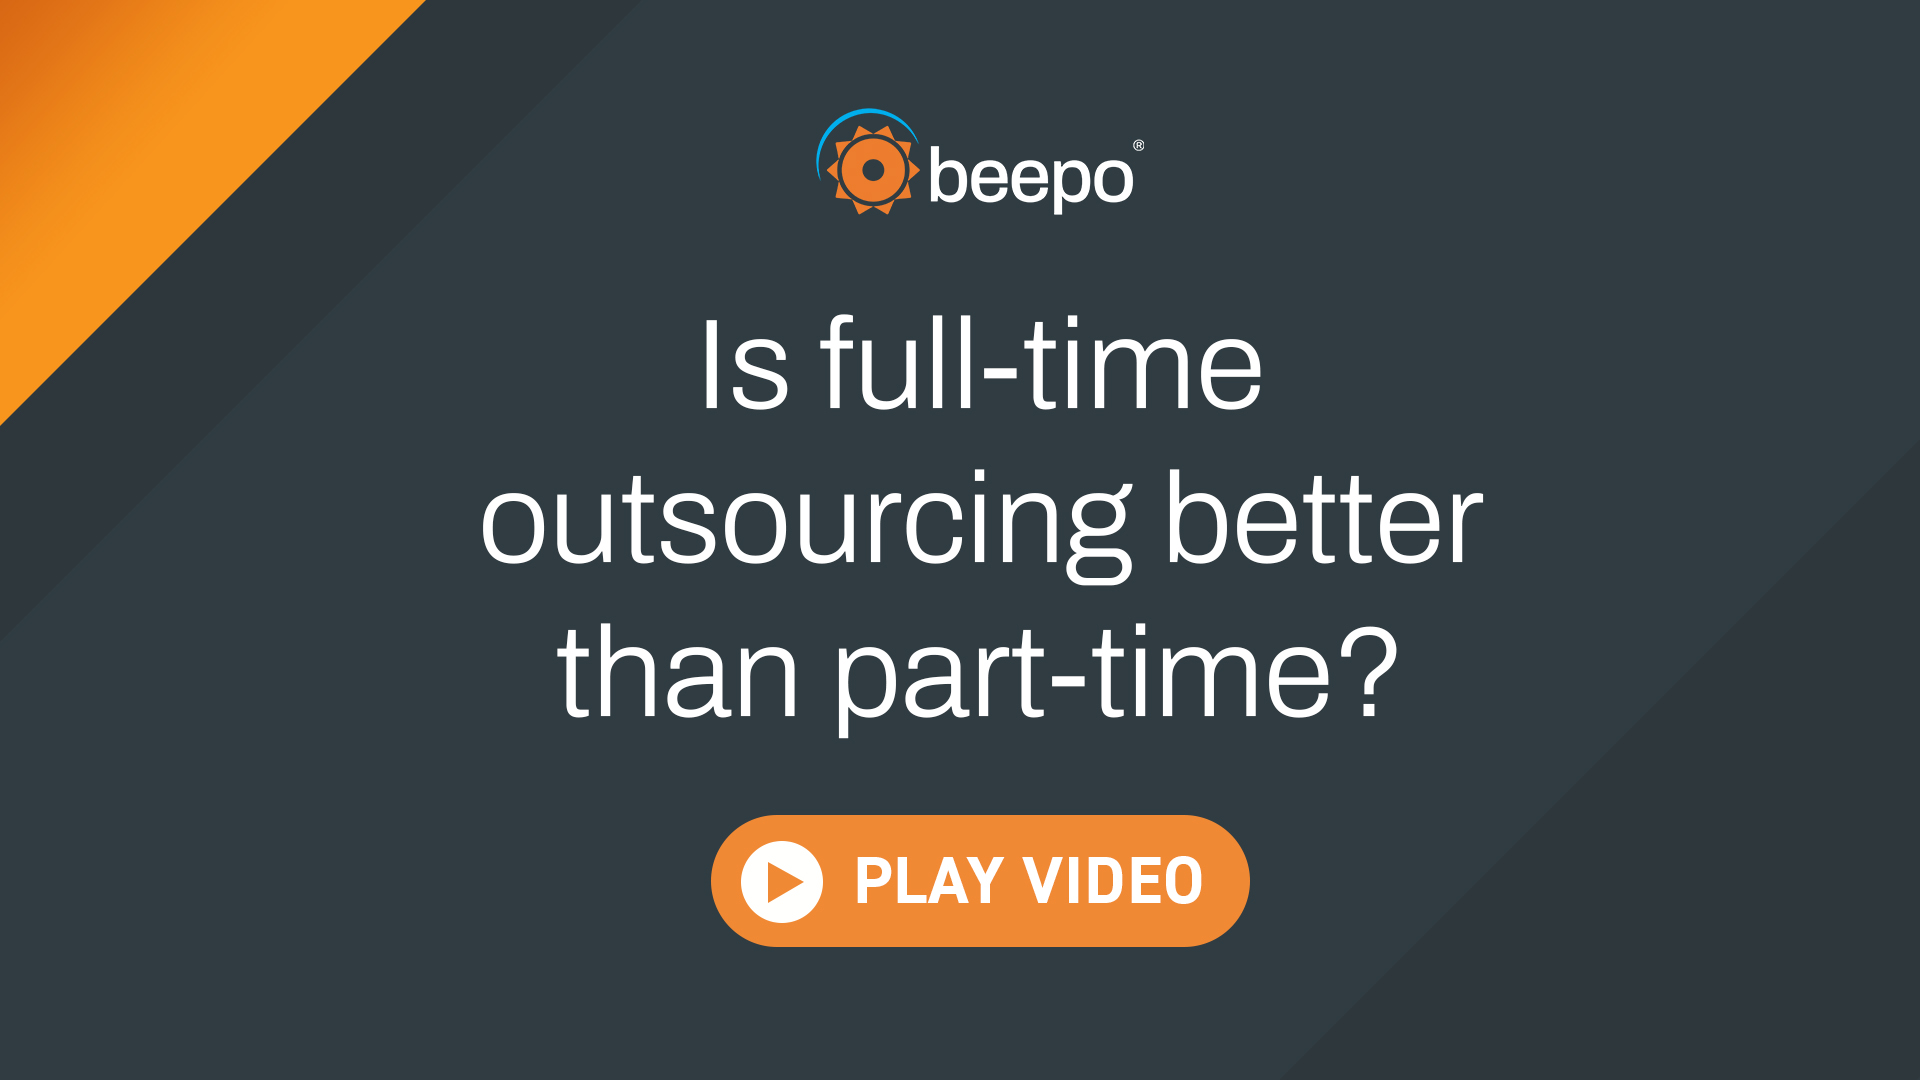 Is full-time outsourcing better than part-time?